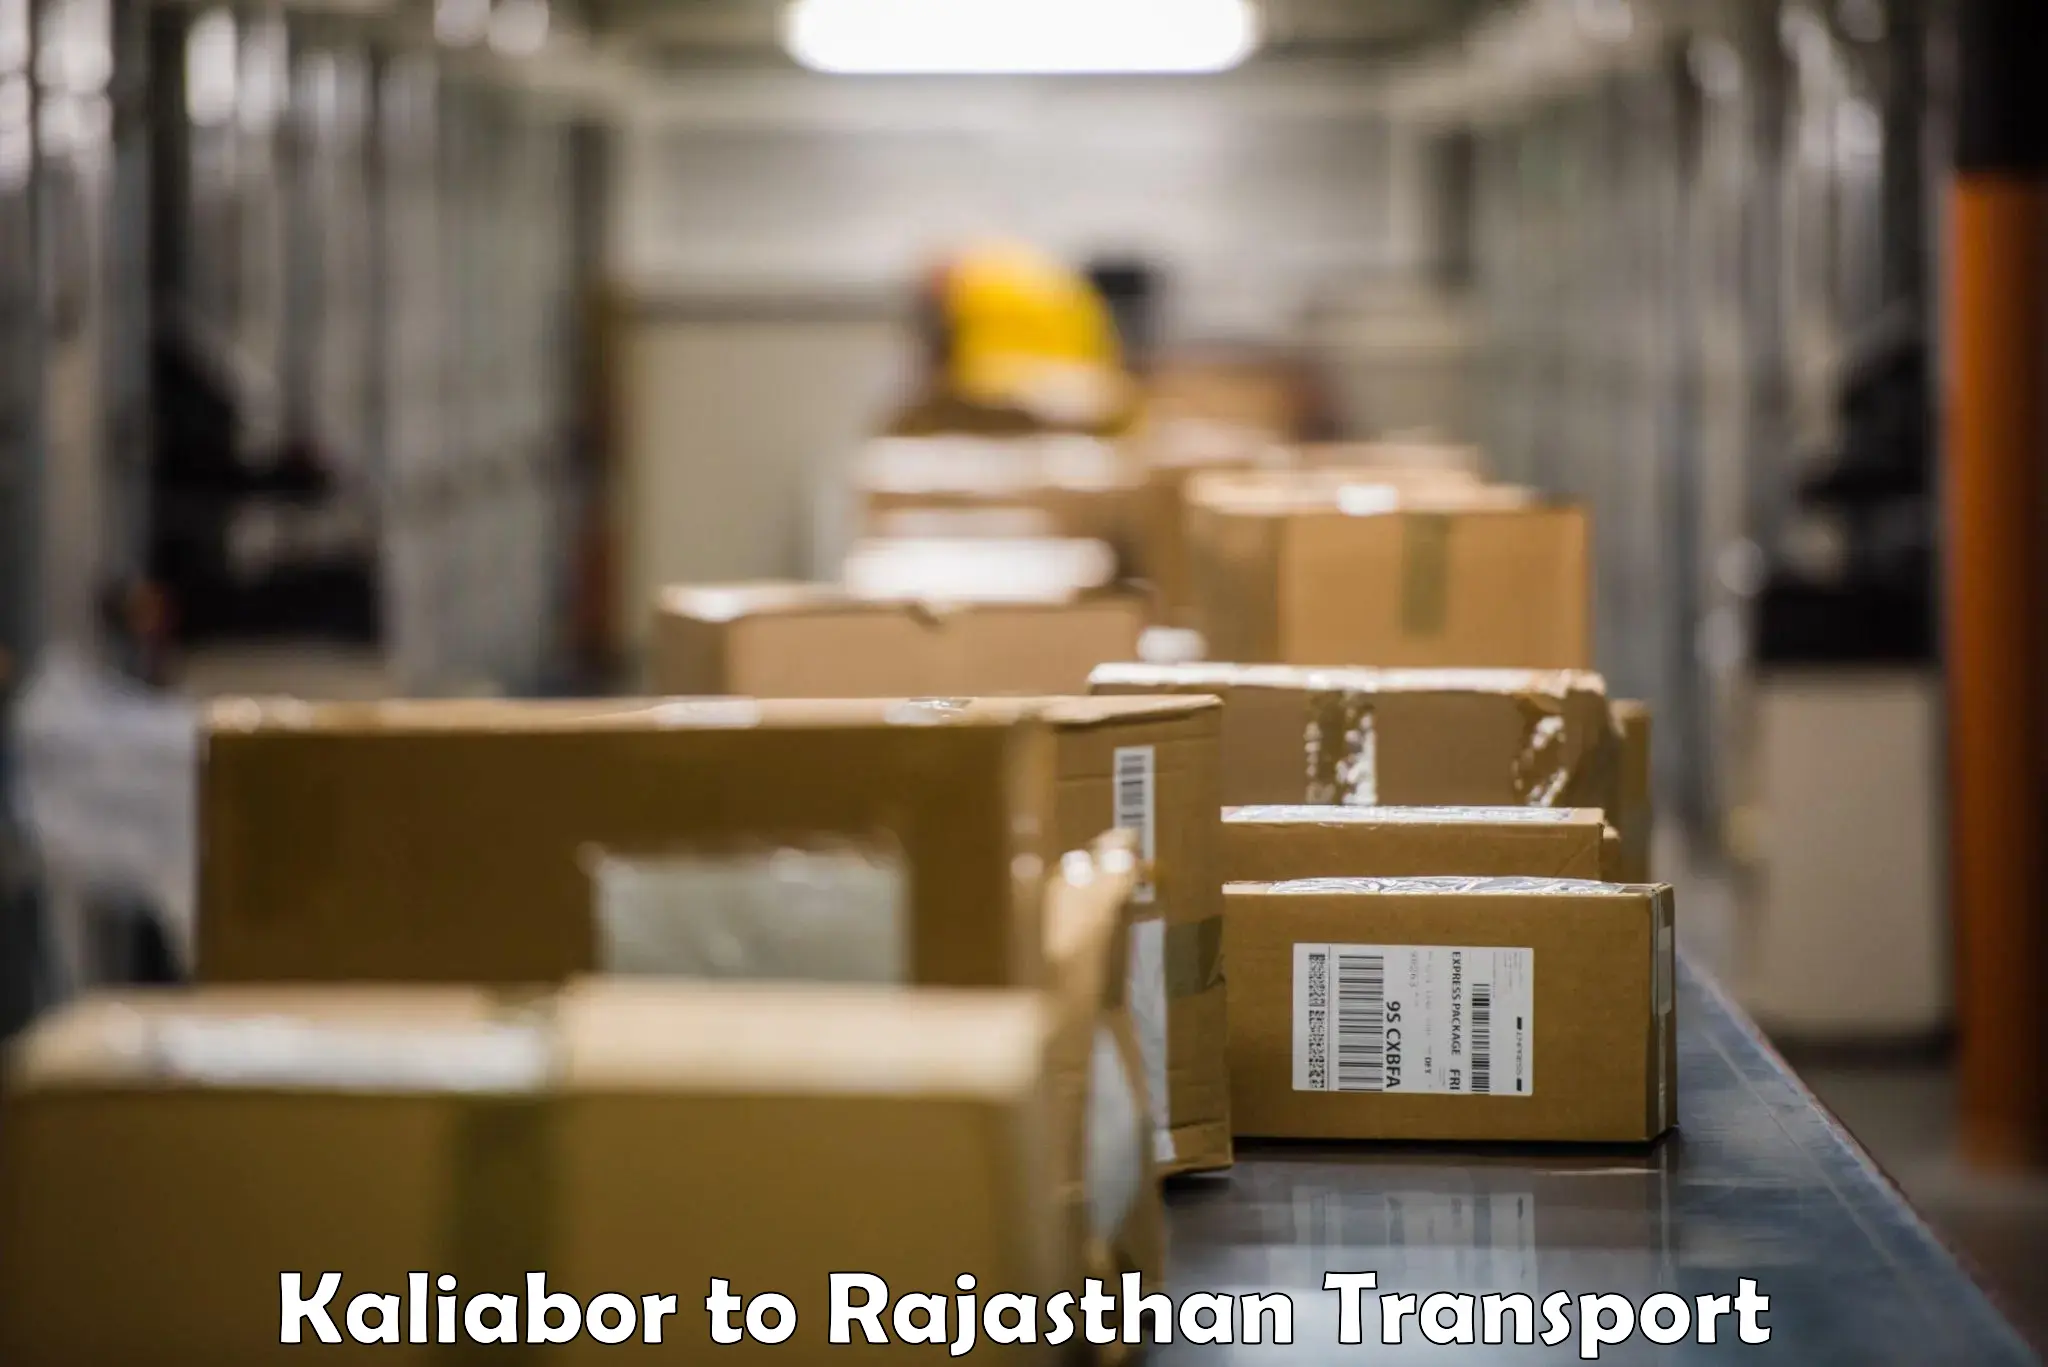 Truck transport companies in India Kaliabor to Yeswanthapur